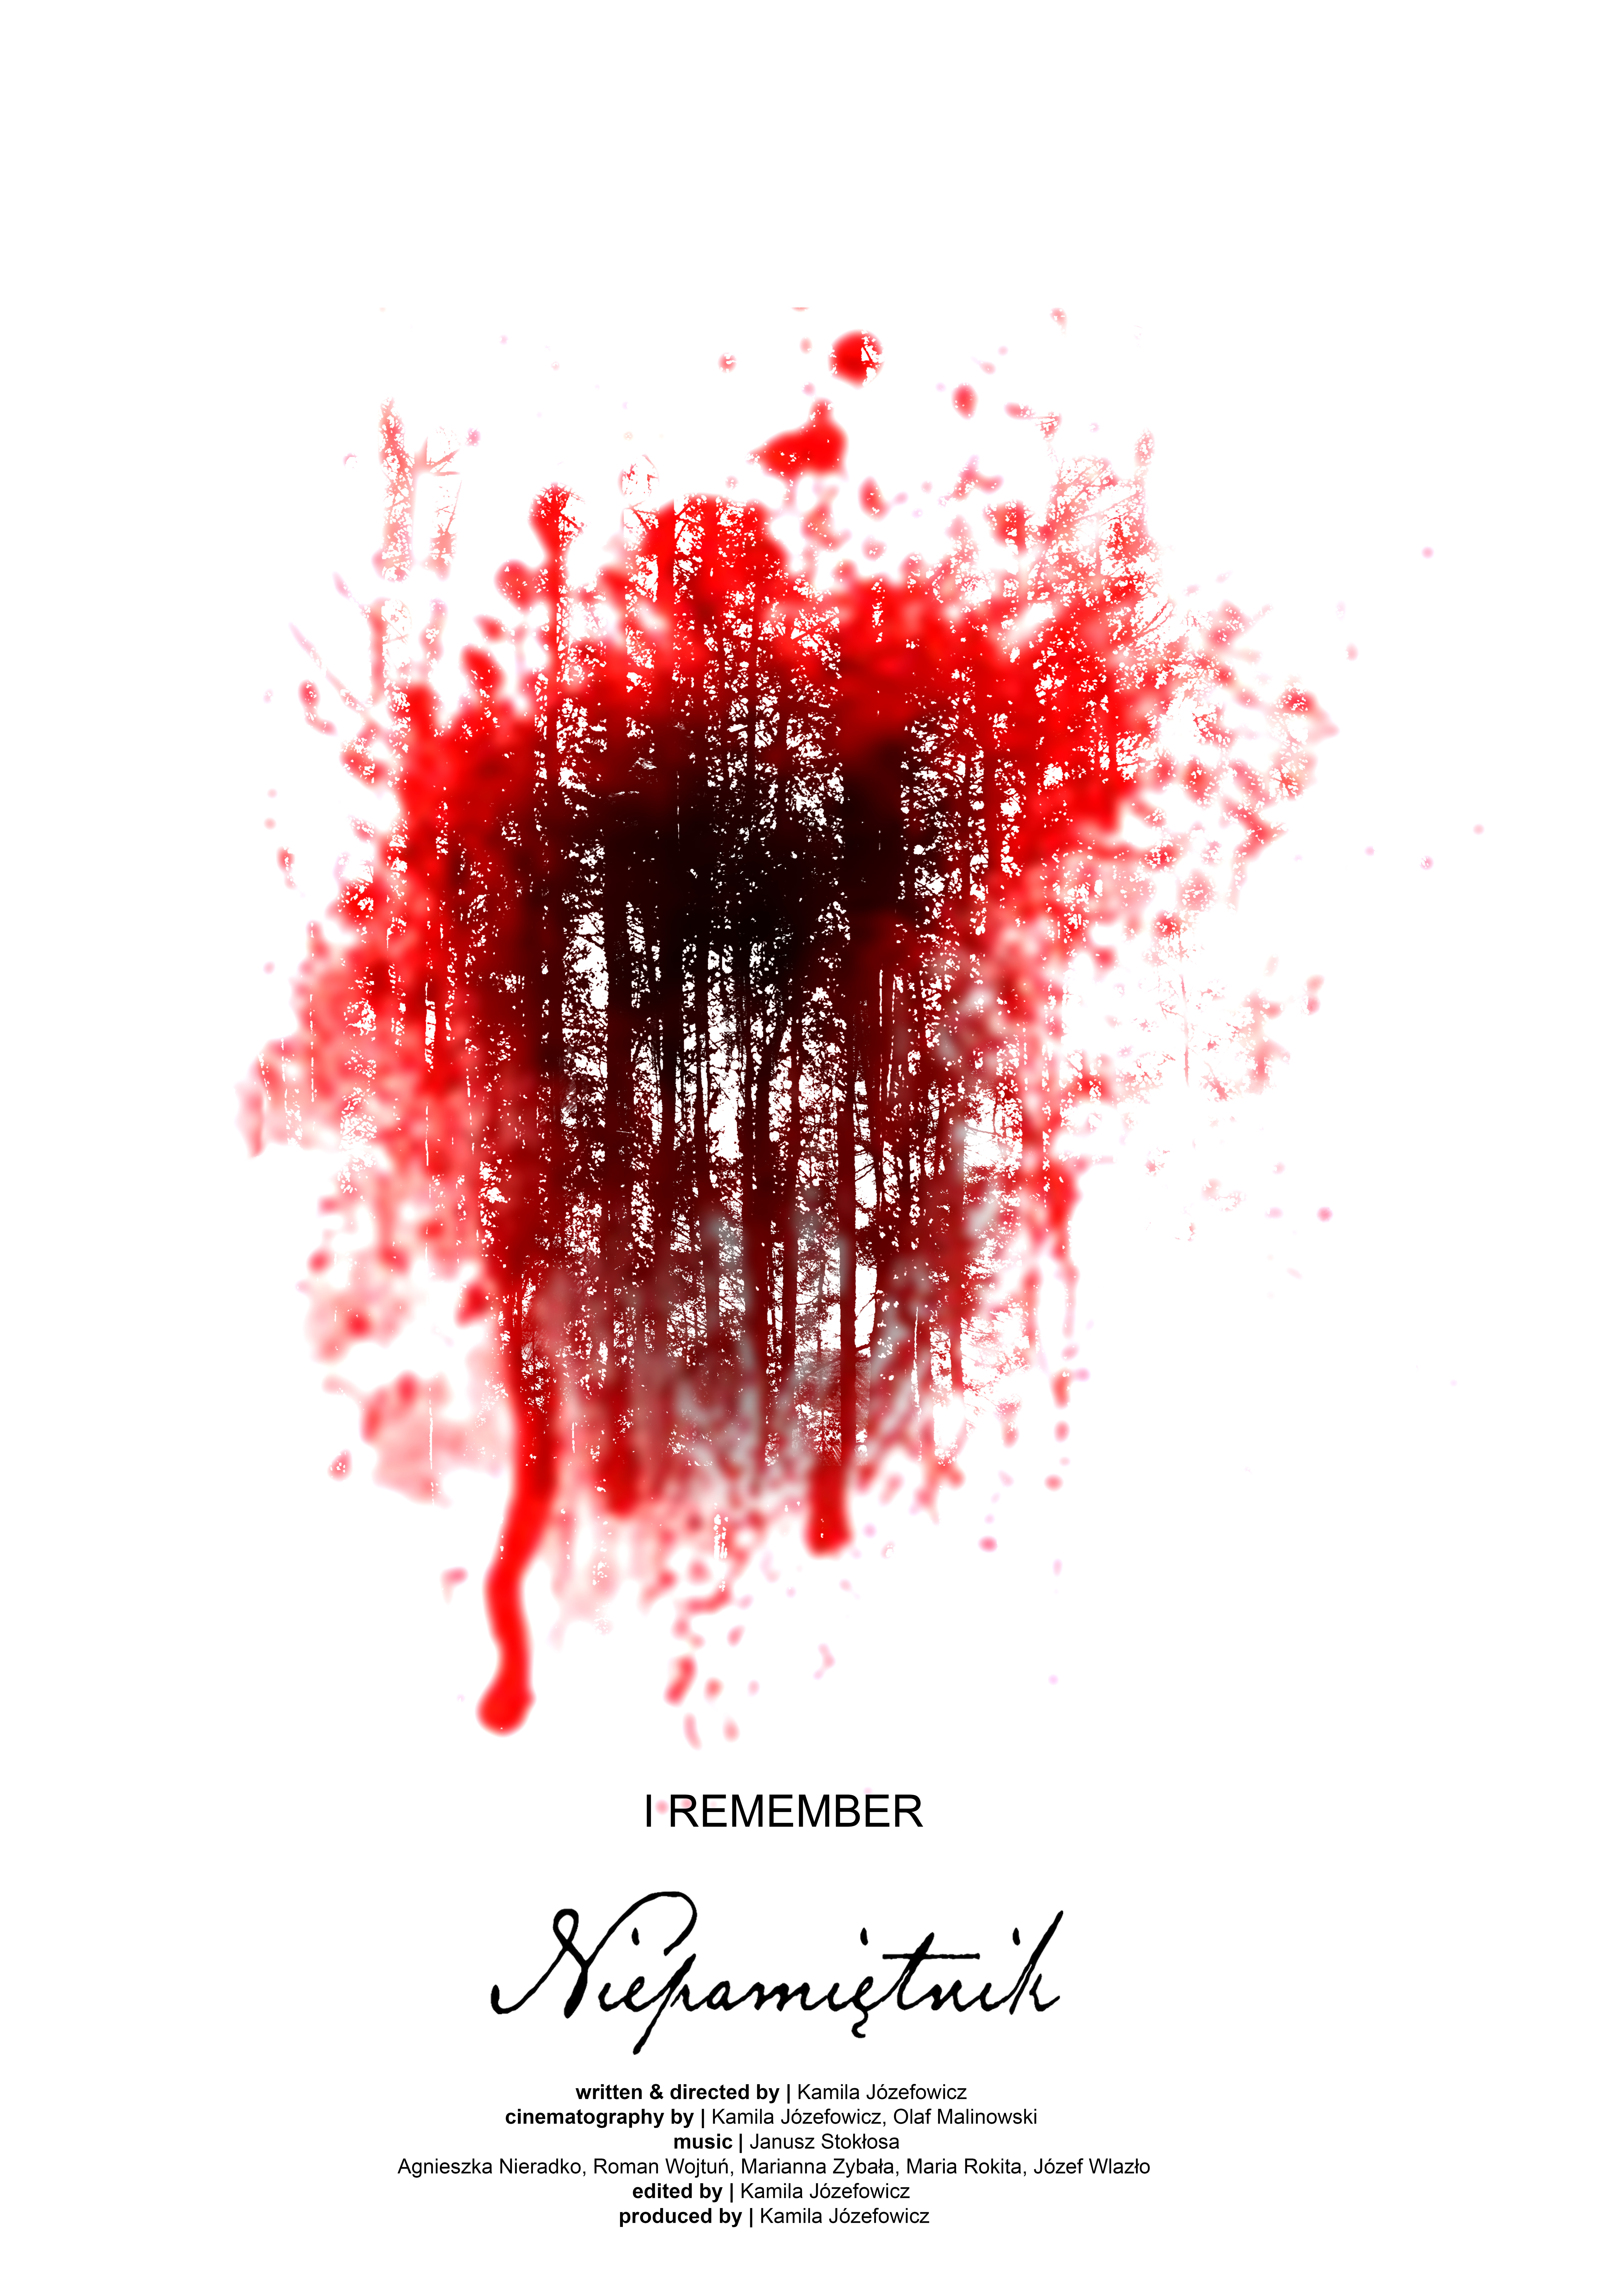 Poster for the documentary film I, Remember with a red splatter that resembles blood around a darker red grove of trees. Text is I, Remember, and Niepamietnik and other text.